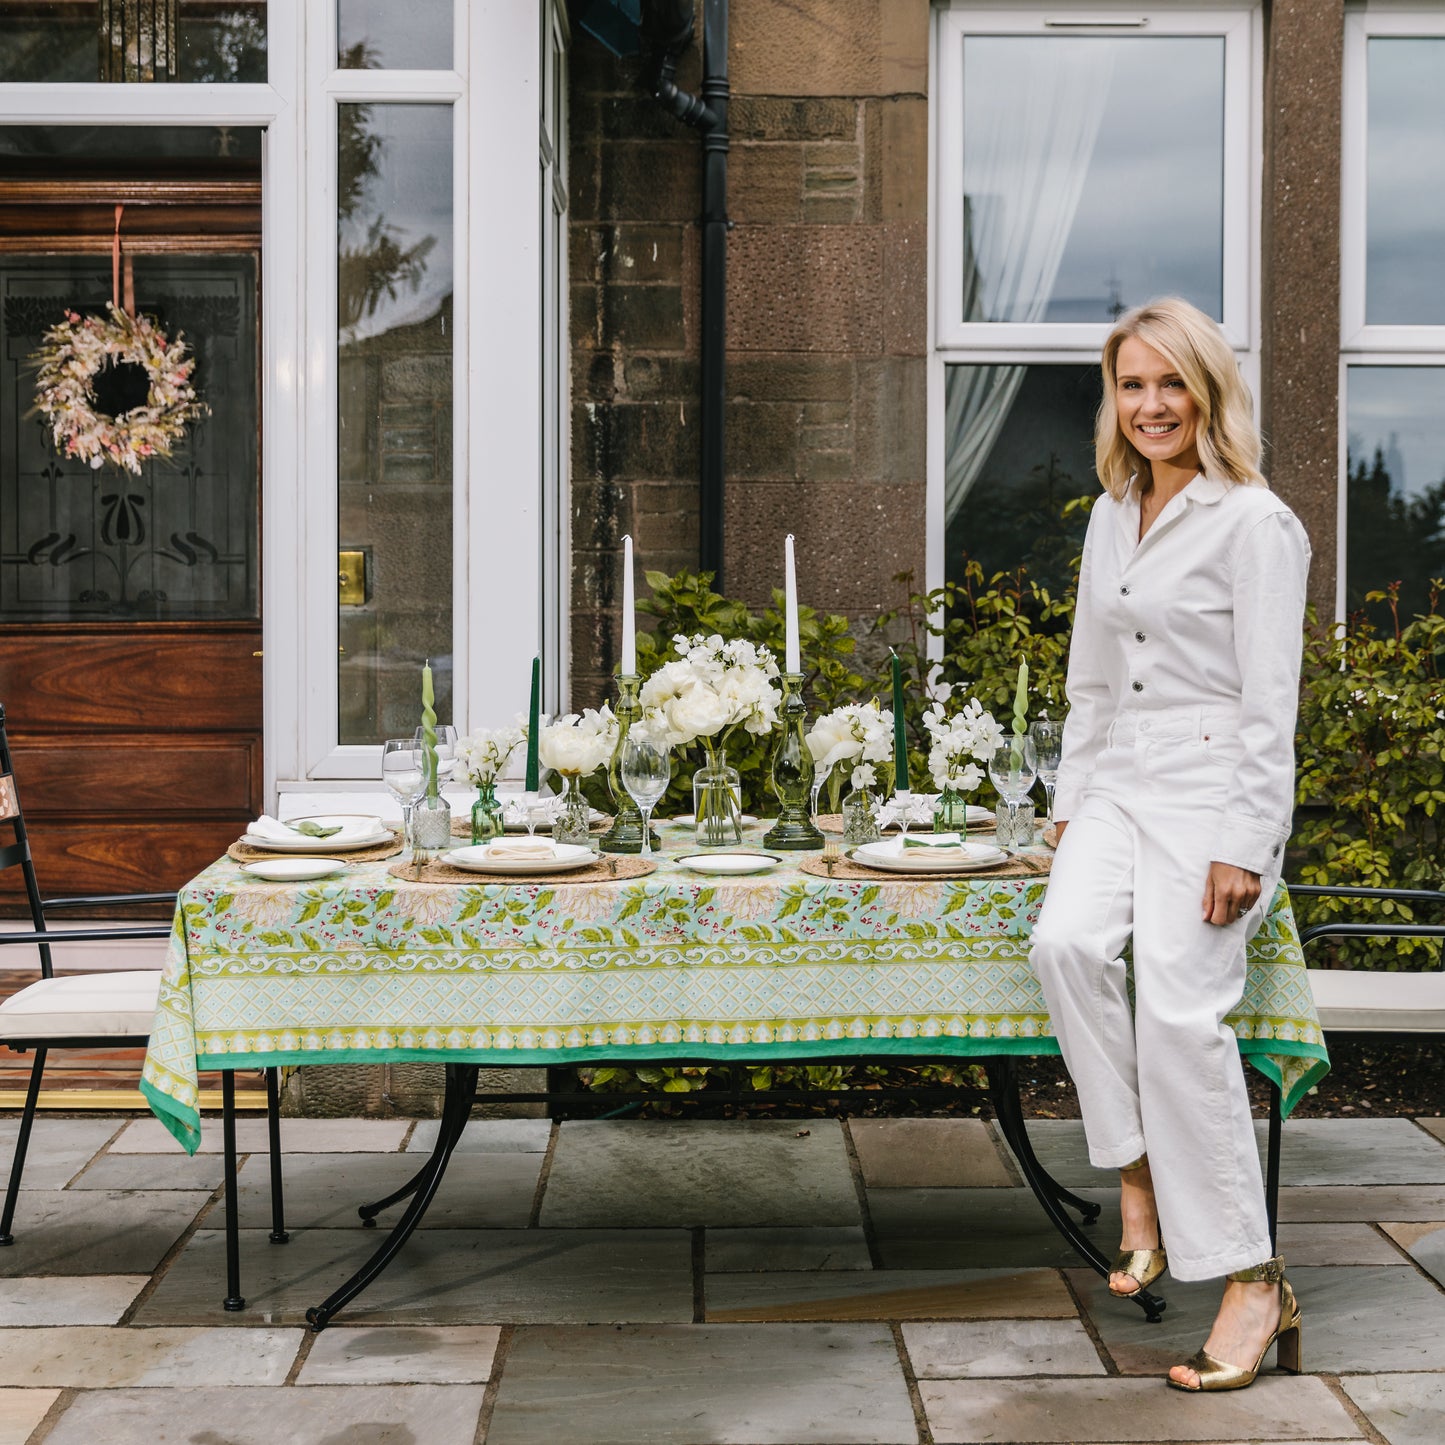 Kate Fairlie, founder of Truffle Tablescapes, next to the Mint & Moss tableware collection including green indian block print tablecloth, seagrass placemats, green glass candle holders, white linen napkins and green velvet napkin bows